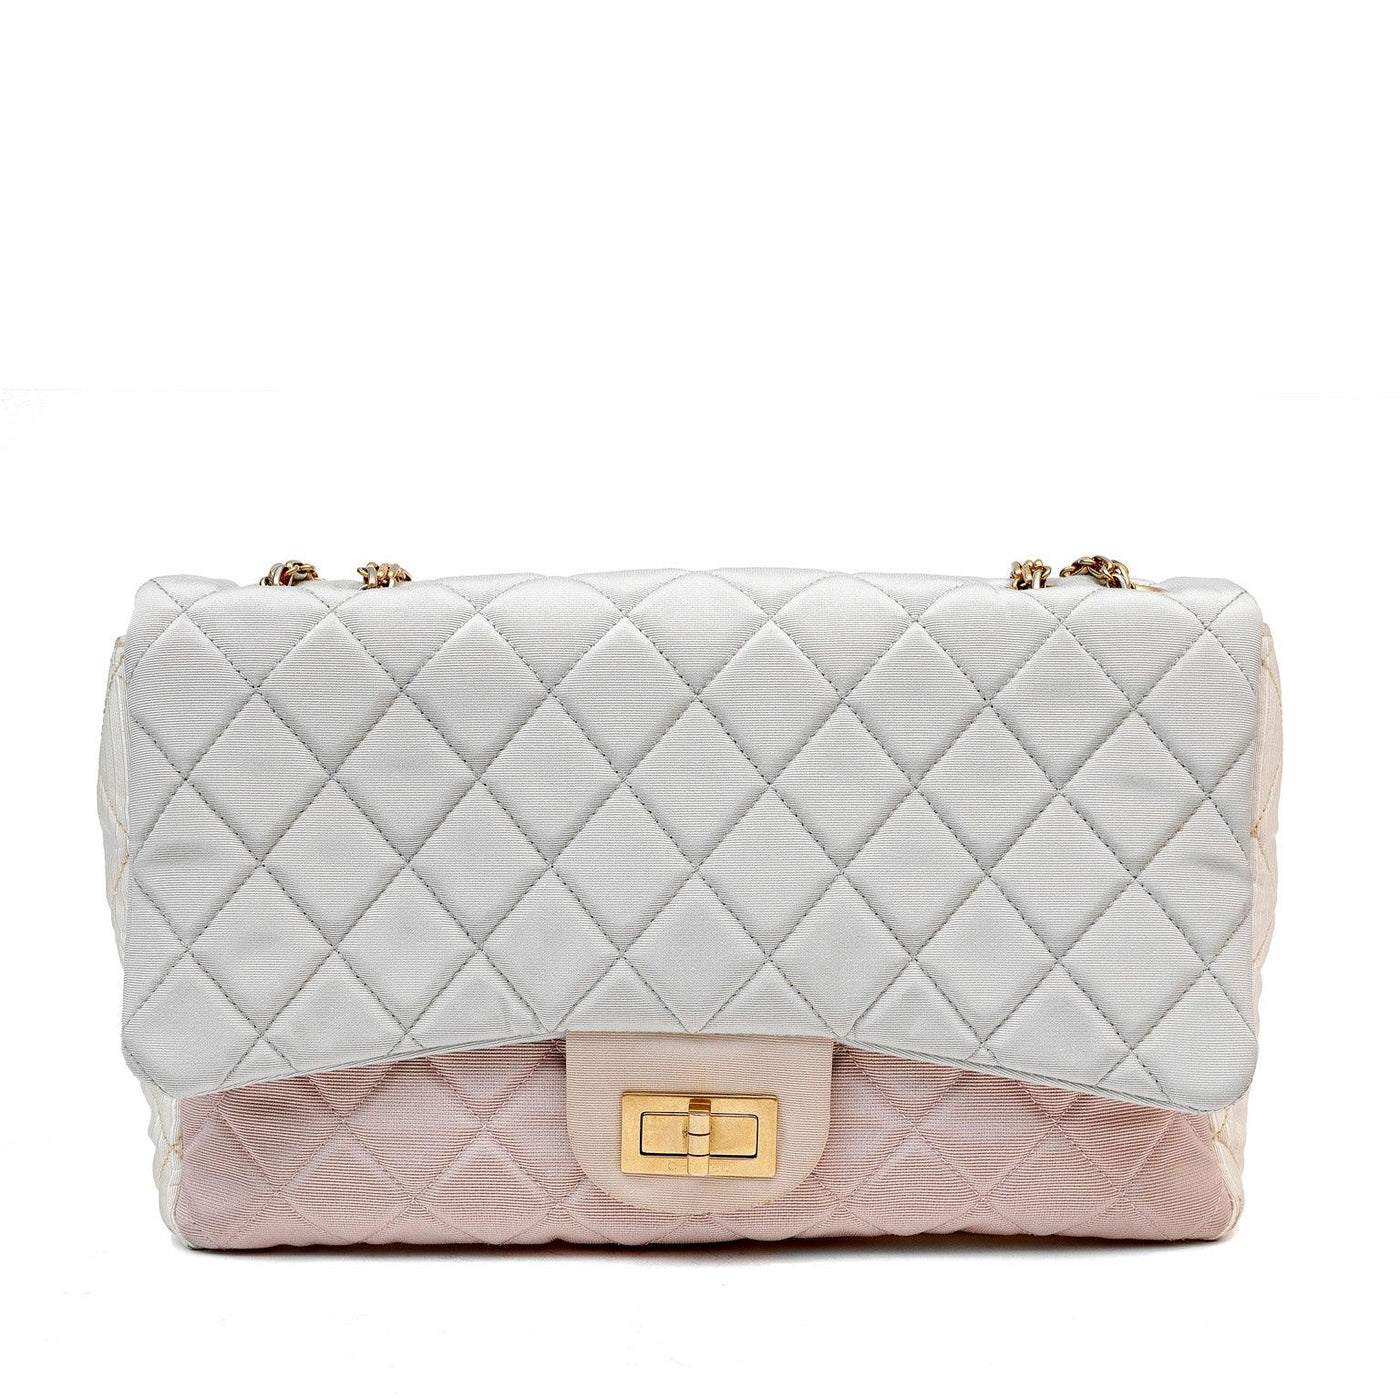 Chanel Tricolor Fabric Reissue Flap Bag - Only Authentics